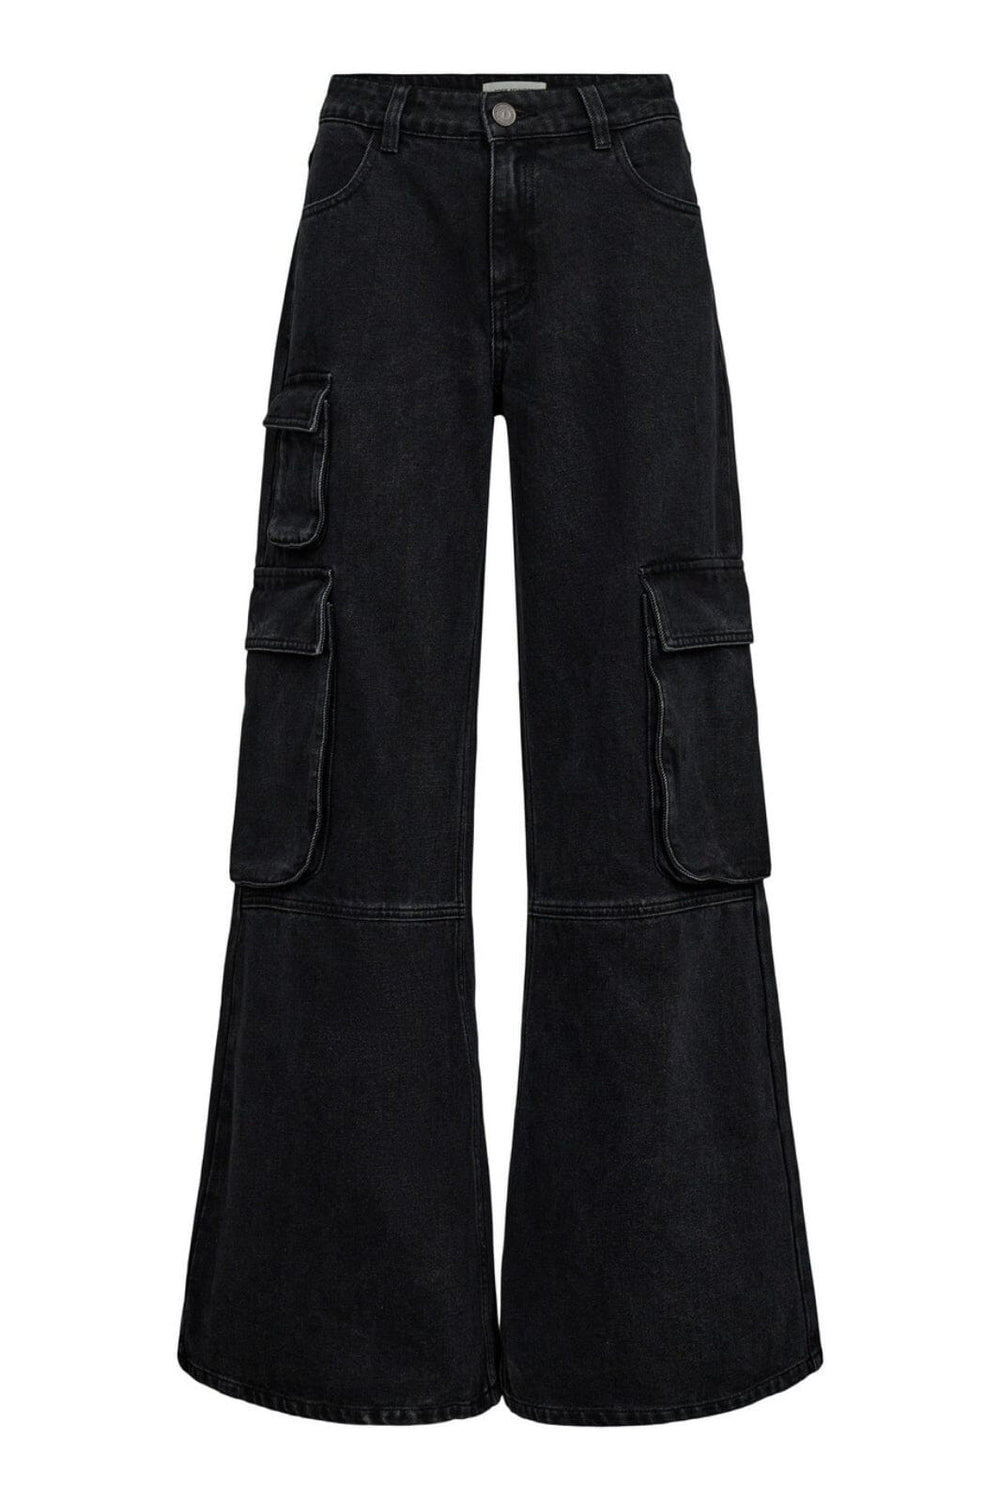 Sofie Schnoor - S234252 Trousers - Washed Black Jeans 